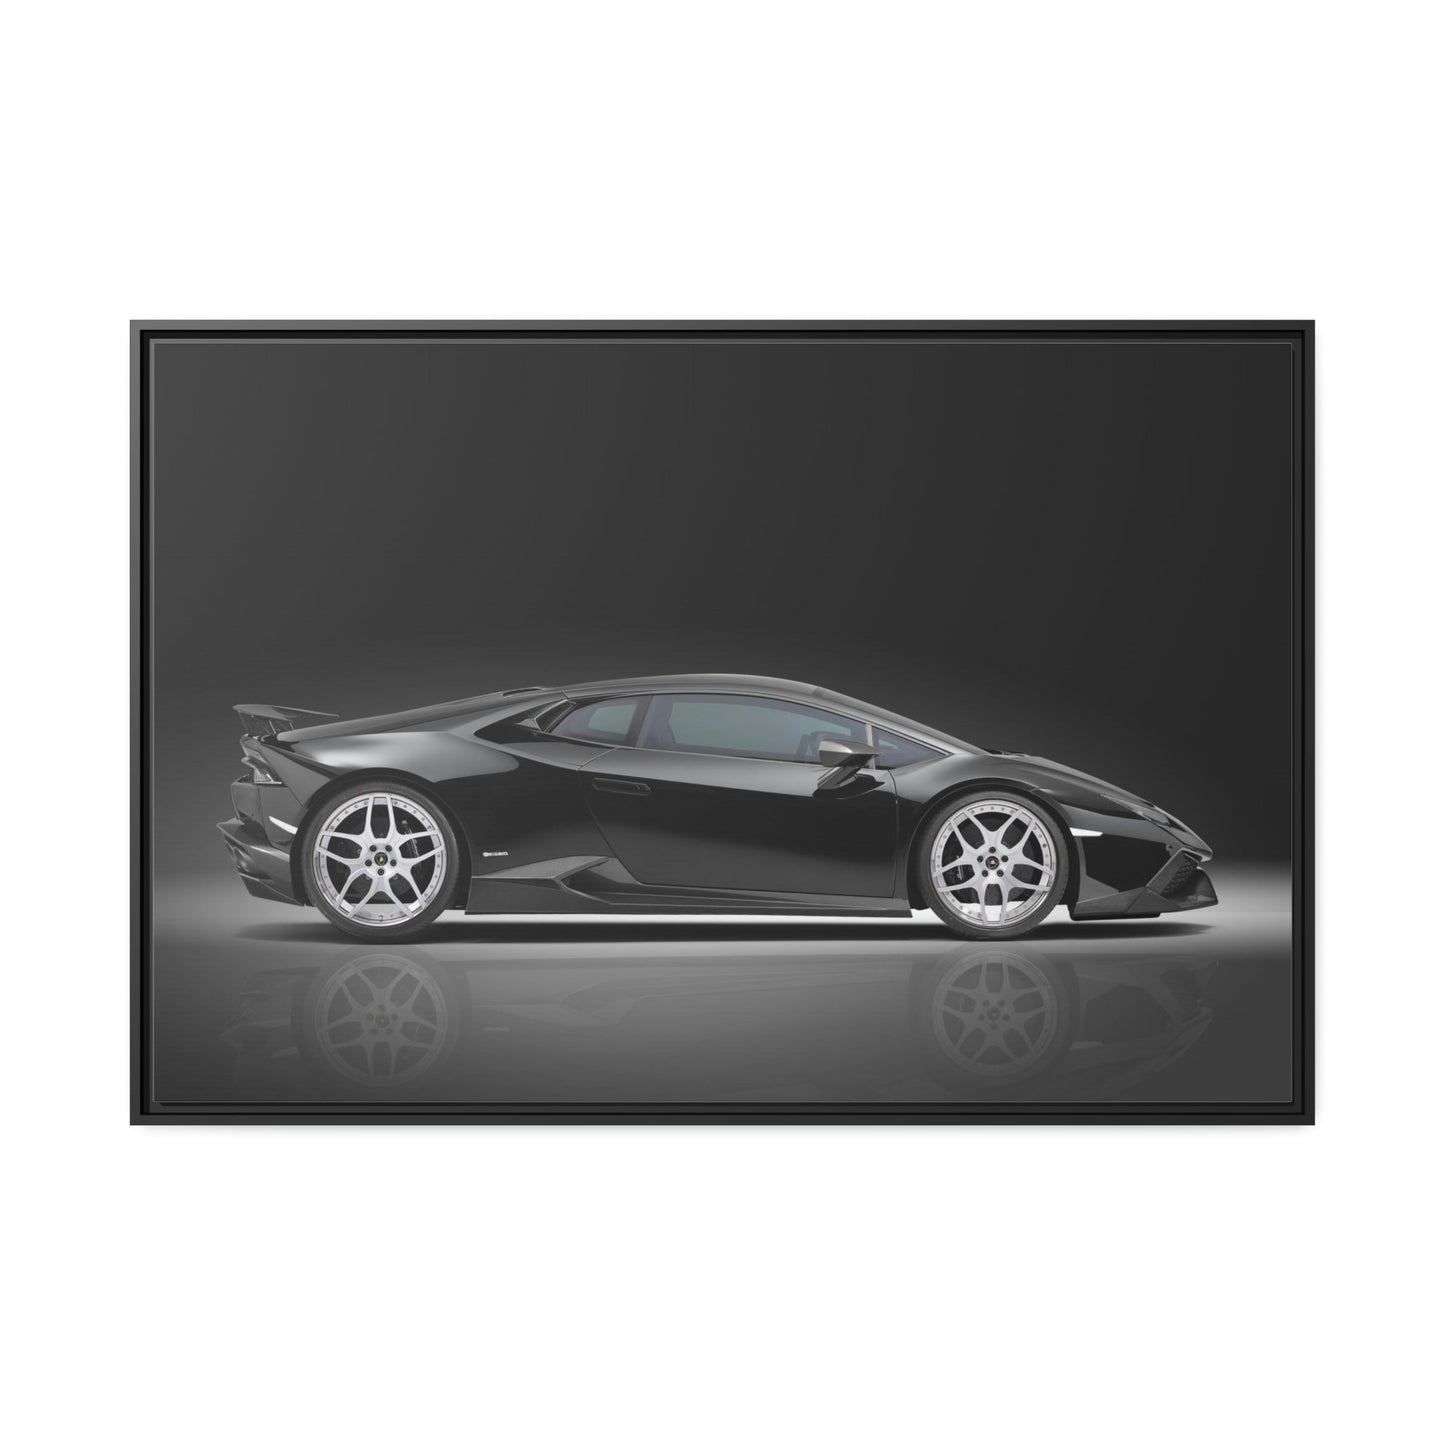 Artistic Rendering of a Lamborghini: Print on Canvas for Car Fans